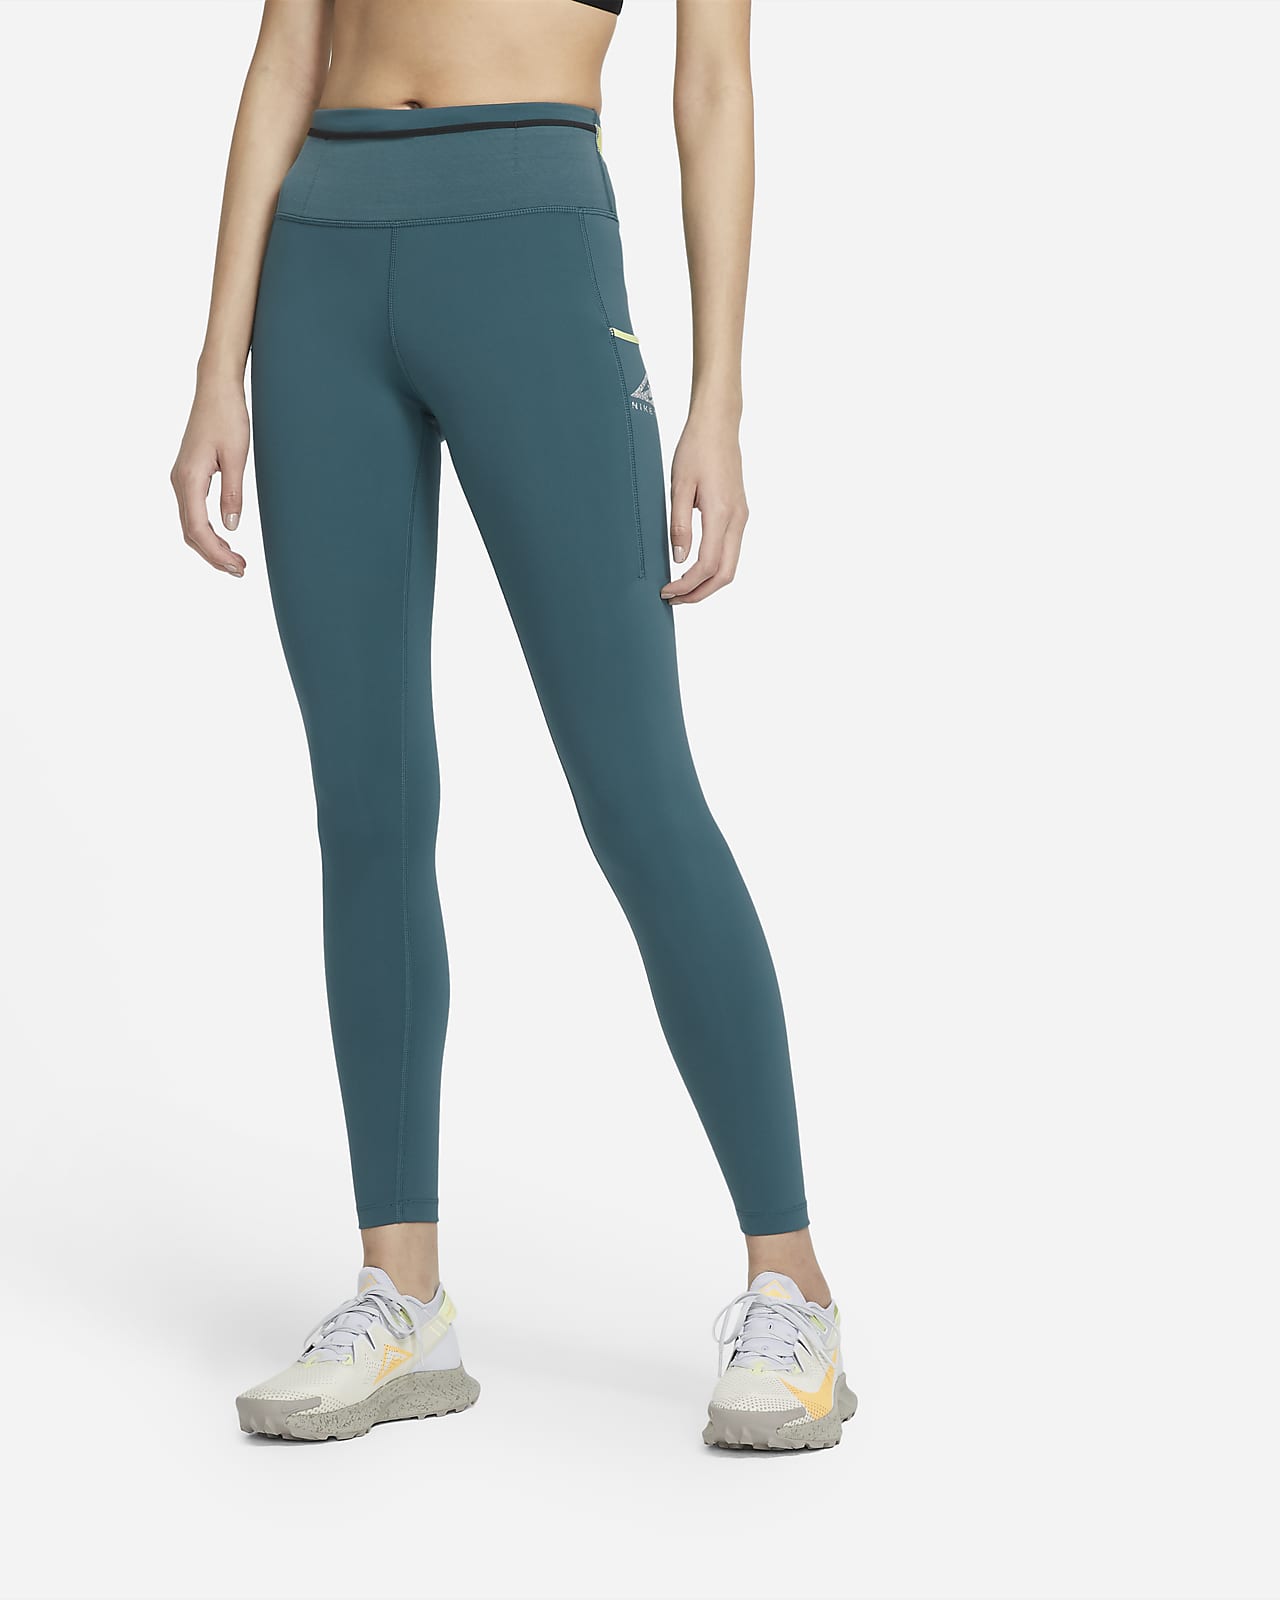 NIKE WOMENS EPIC LUXE MID-RISE TRAIL RUNNING LEGGINGS